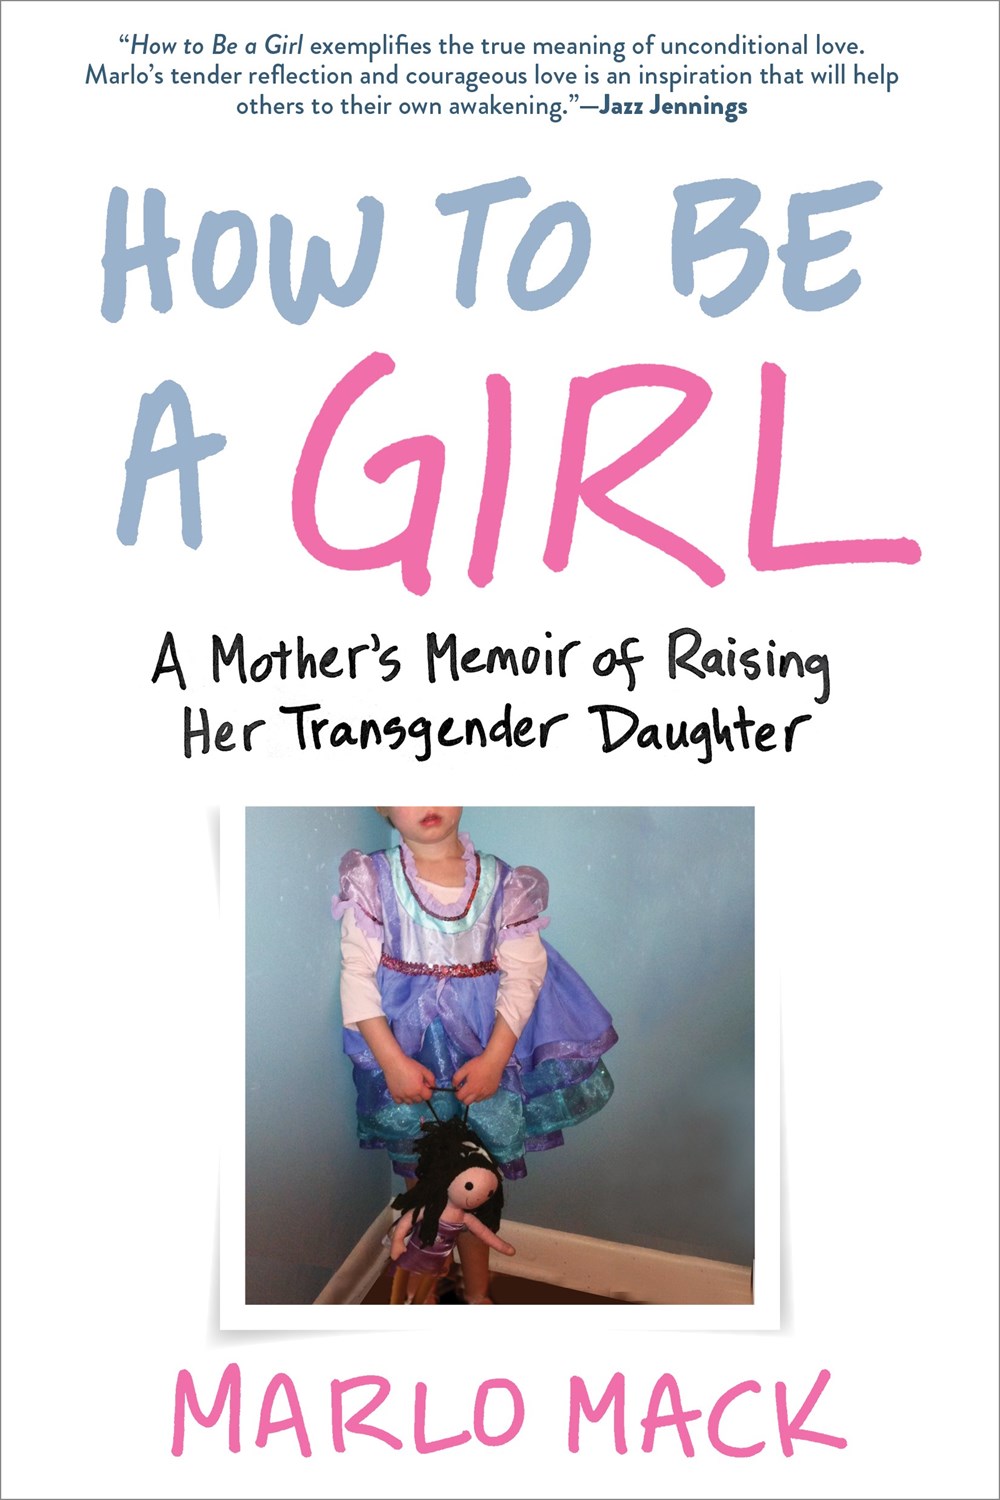 The cover for Marlo Mack's 'How to be a Girl'.